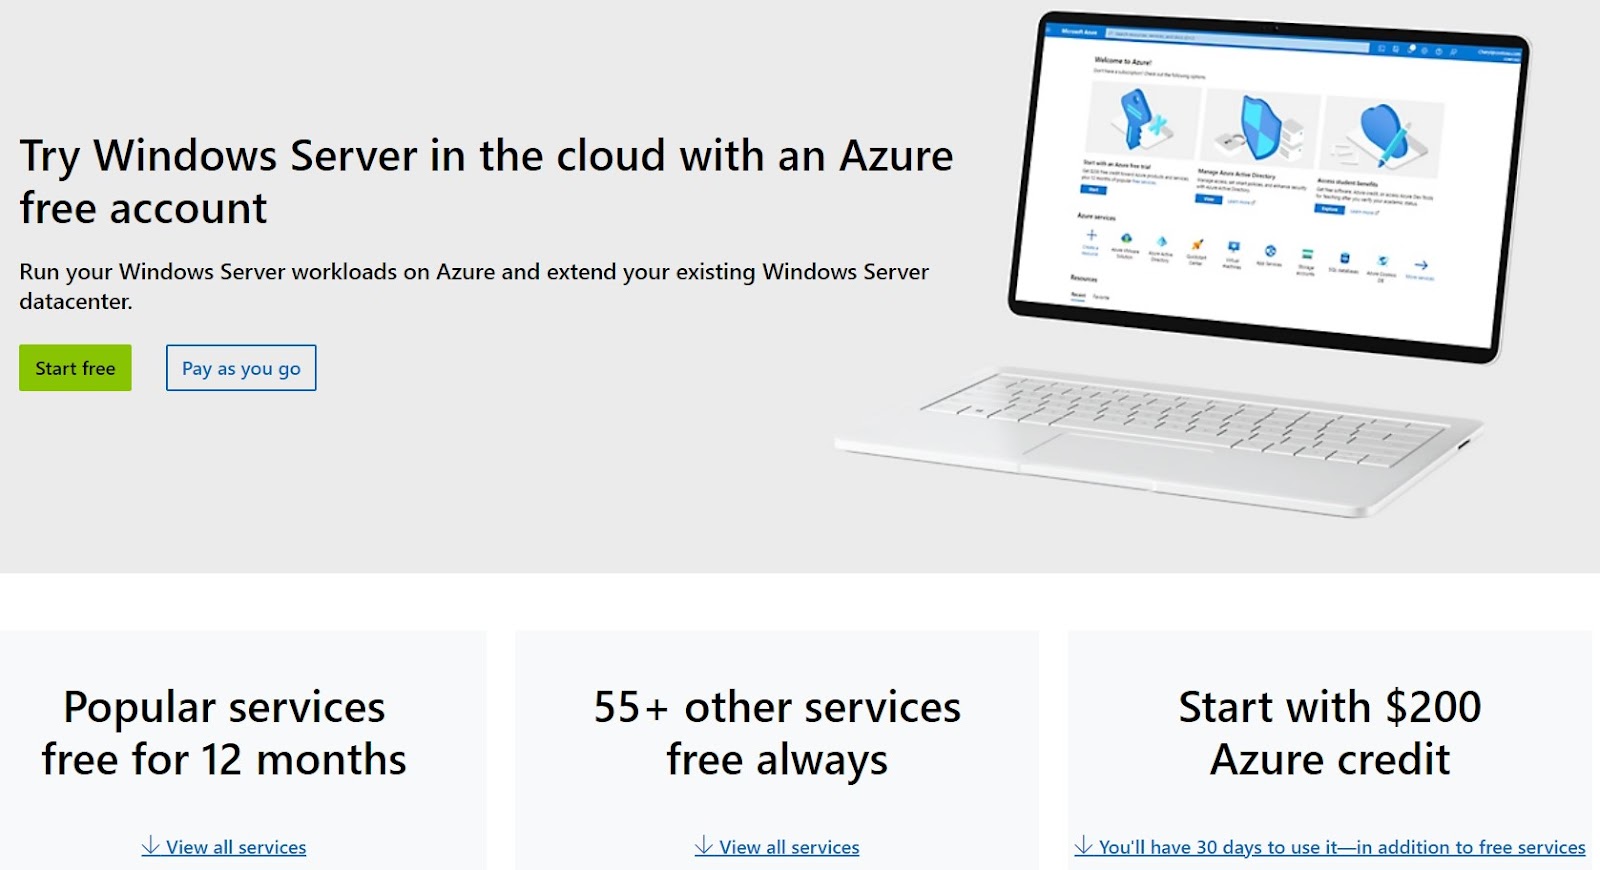 Microsoft Azure trial options and features